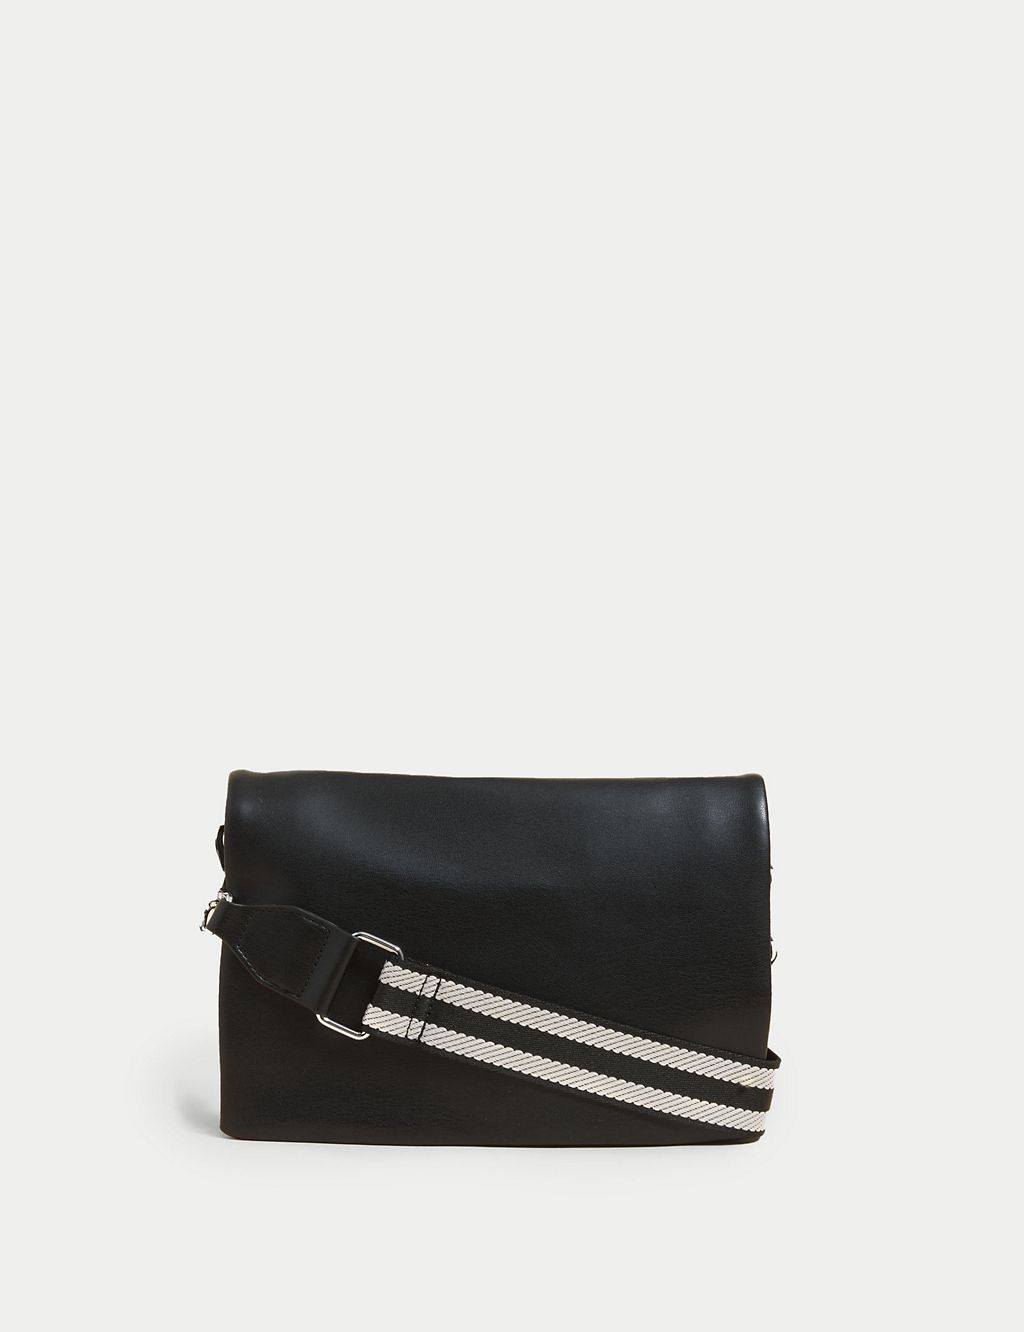 Faux Leather Messenger Cross Body Bag | M&S Collection | M&S